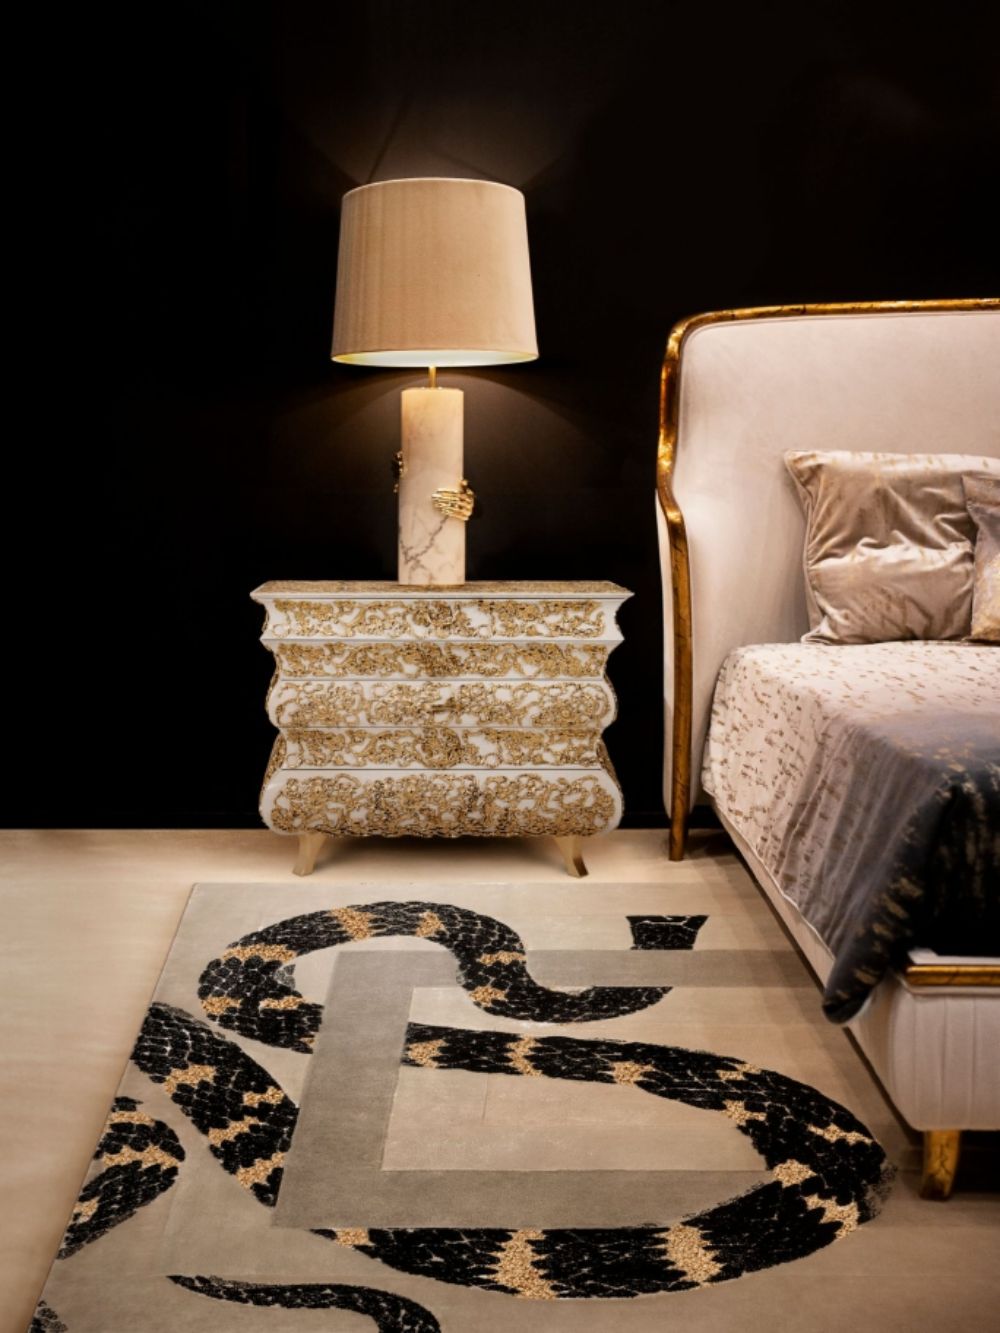 Unique rug ideas for your bedroom and Closet modern classic vintage bedrrom with Imperial snake rug in golden and neutral colors